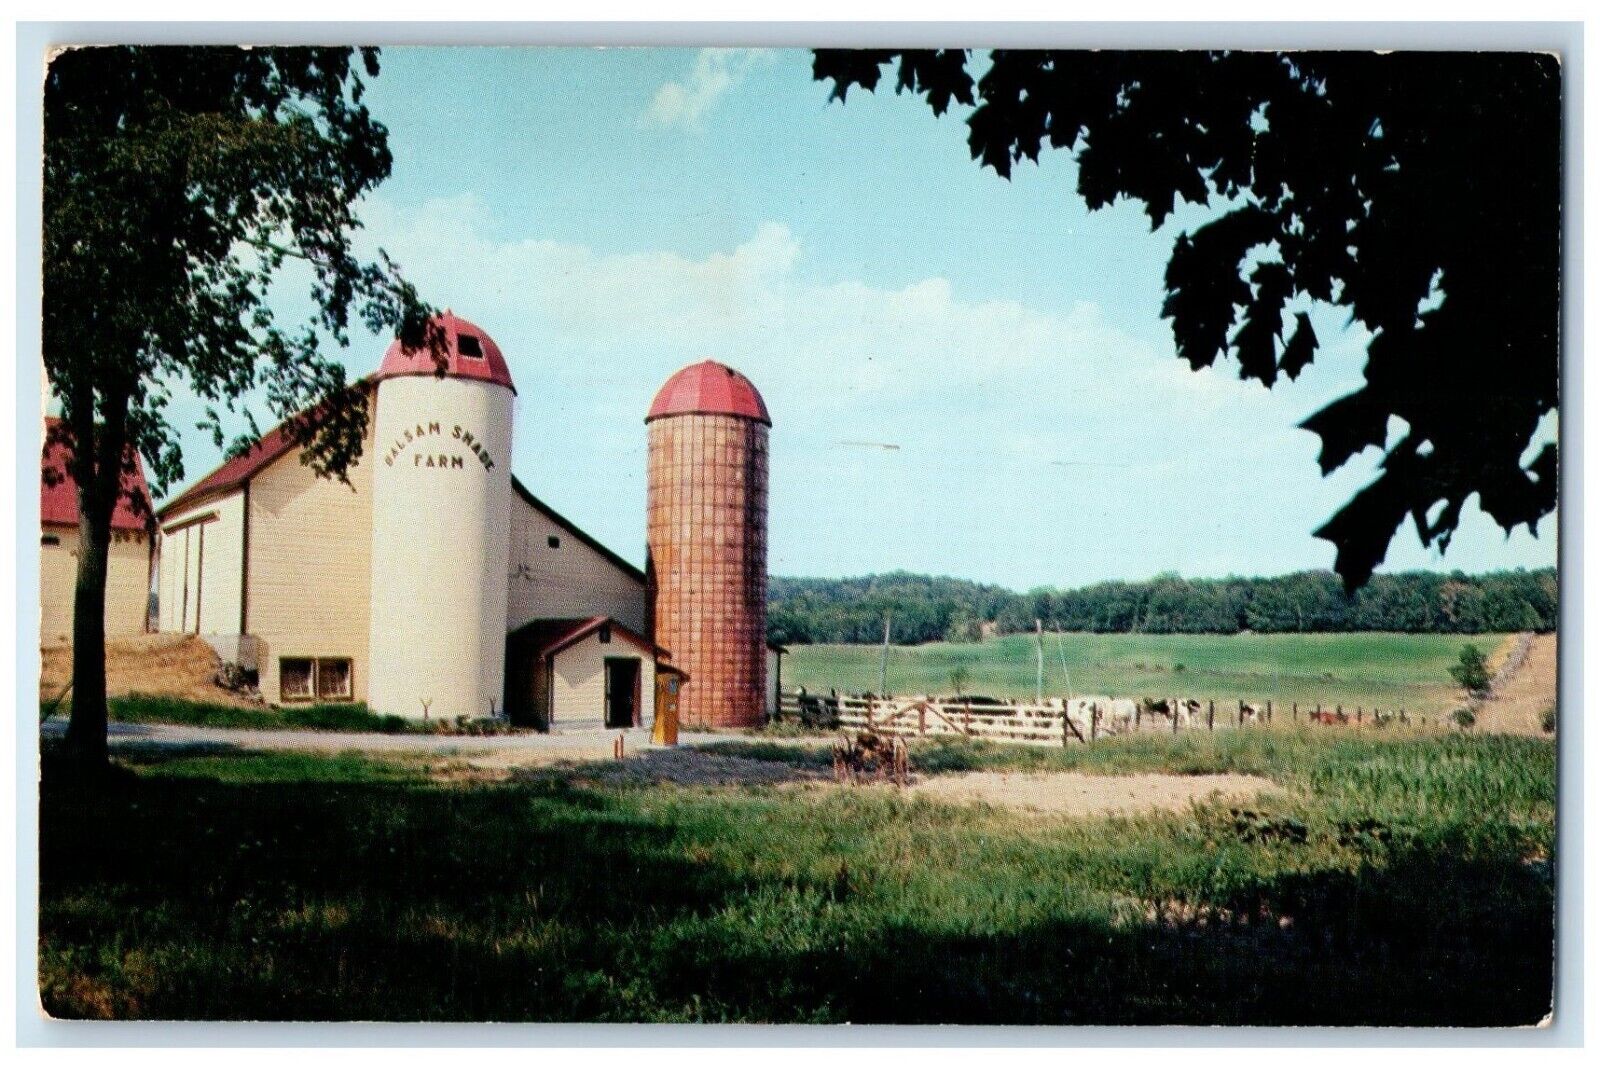 1958 The Balsam Shade Farm Greenville New York NY Posted Vintage Postcard